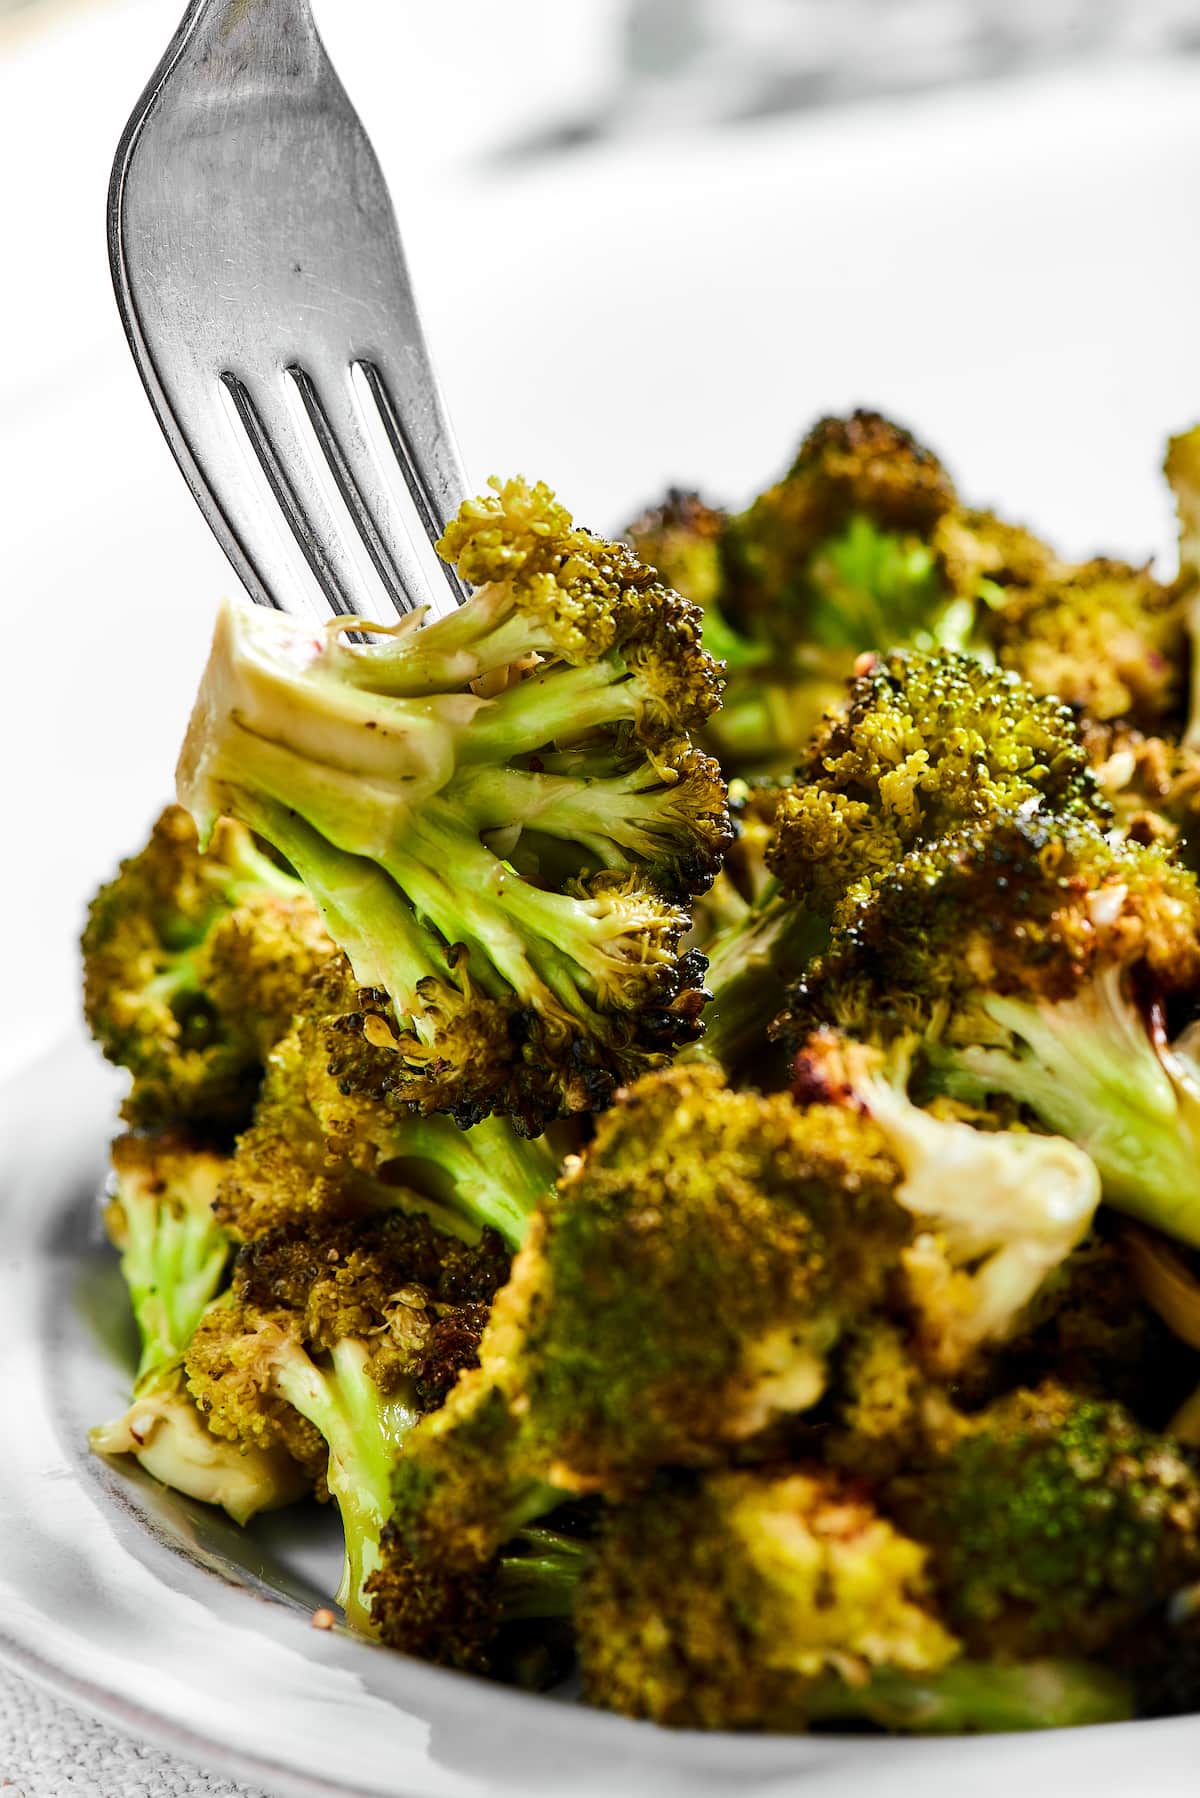 A fork picks up a broccoli floret from a bowl of roasted broccoli.